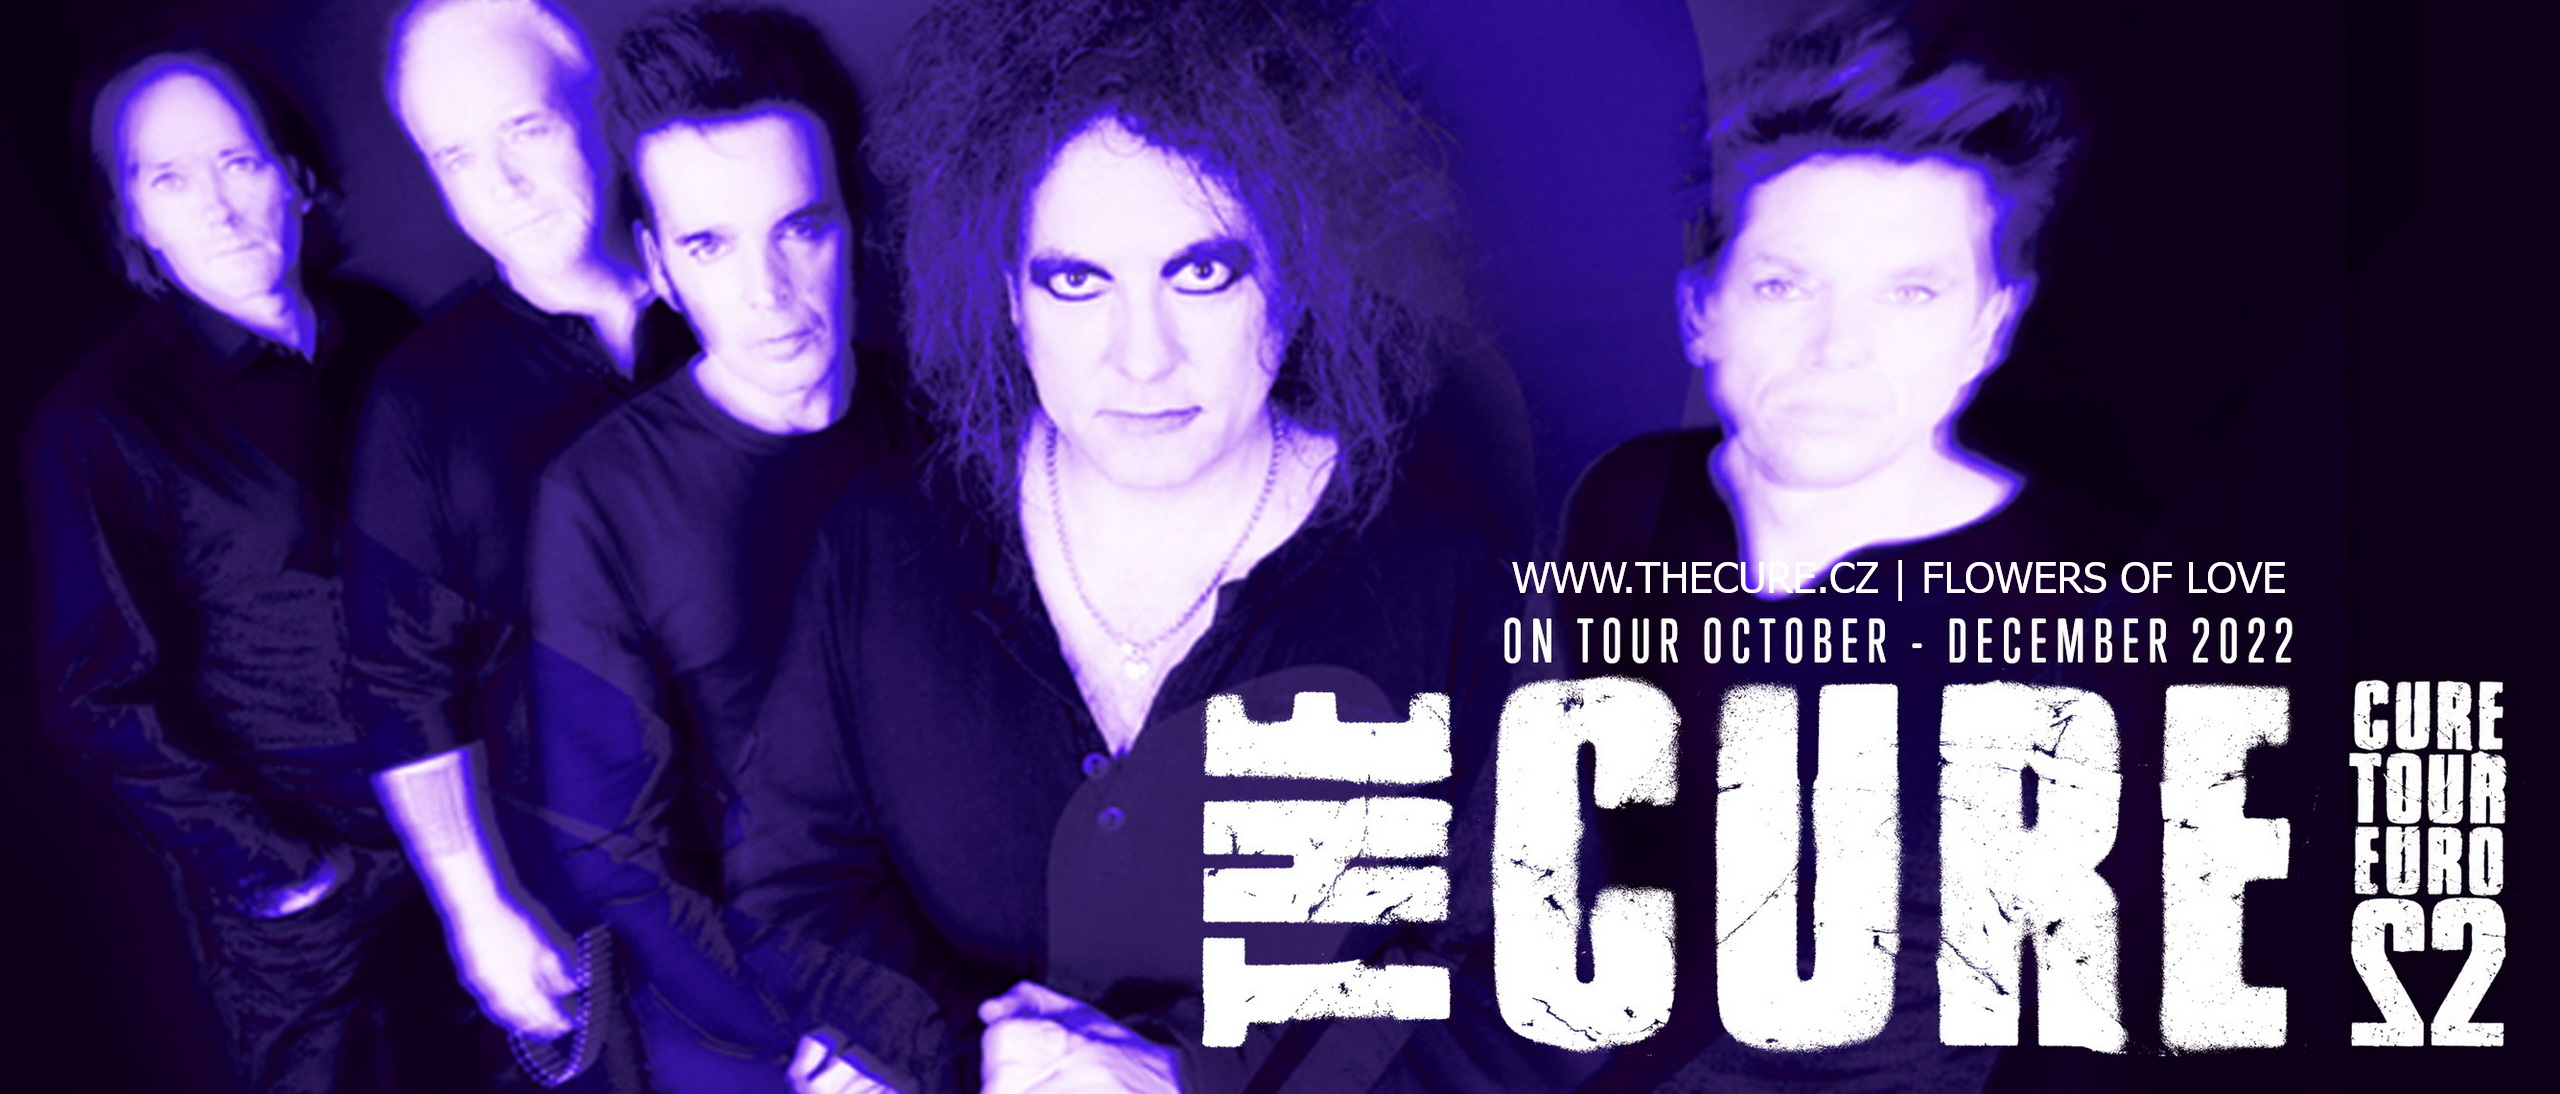 The Cure | Flowers Of Love | www.thecure.cz